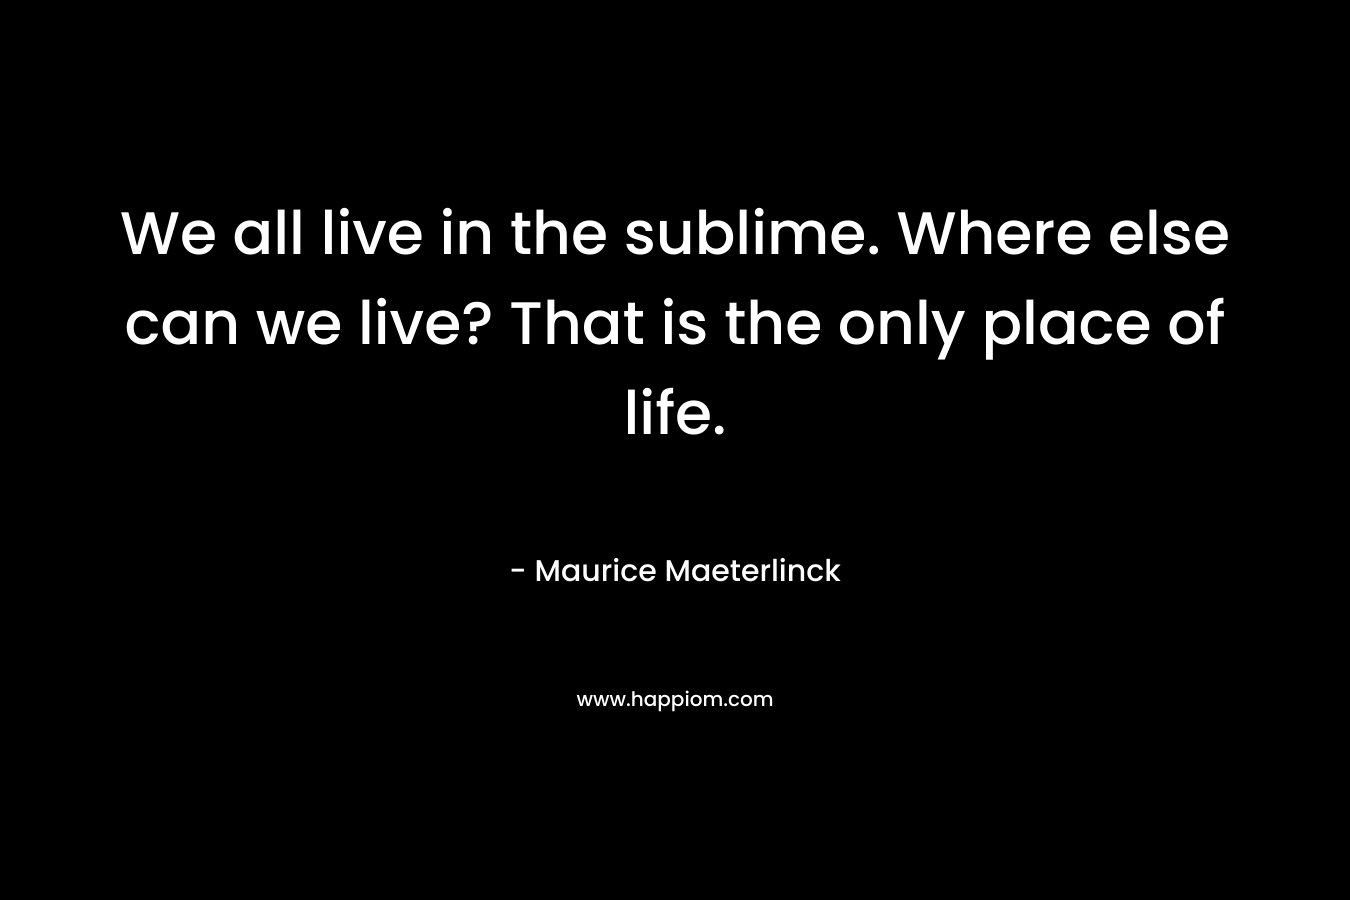 We all live in the sublime. Where else can we live? That is the only place of life.